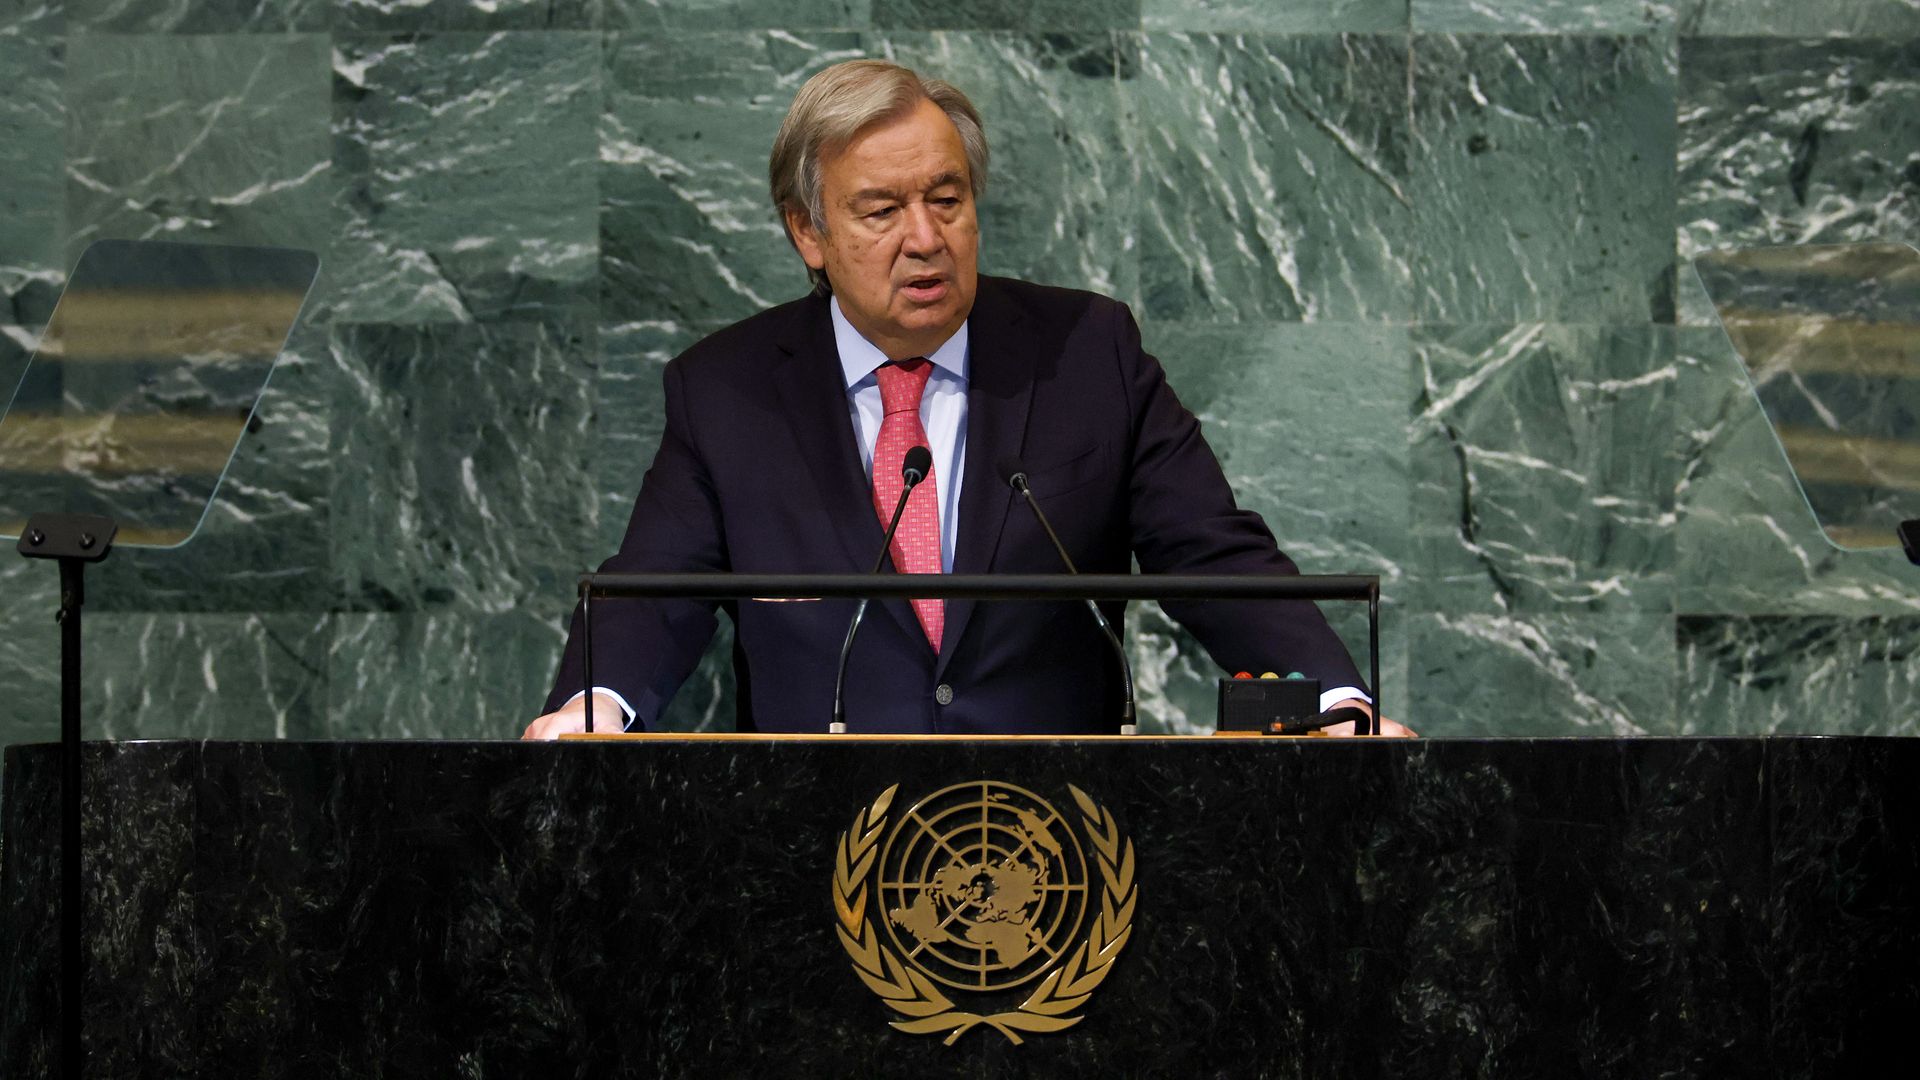 United Nations  Secretary General Antonio Guterres speaking before the General Assembly on Sept. 20.